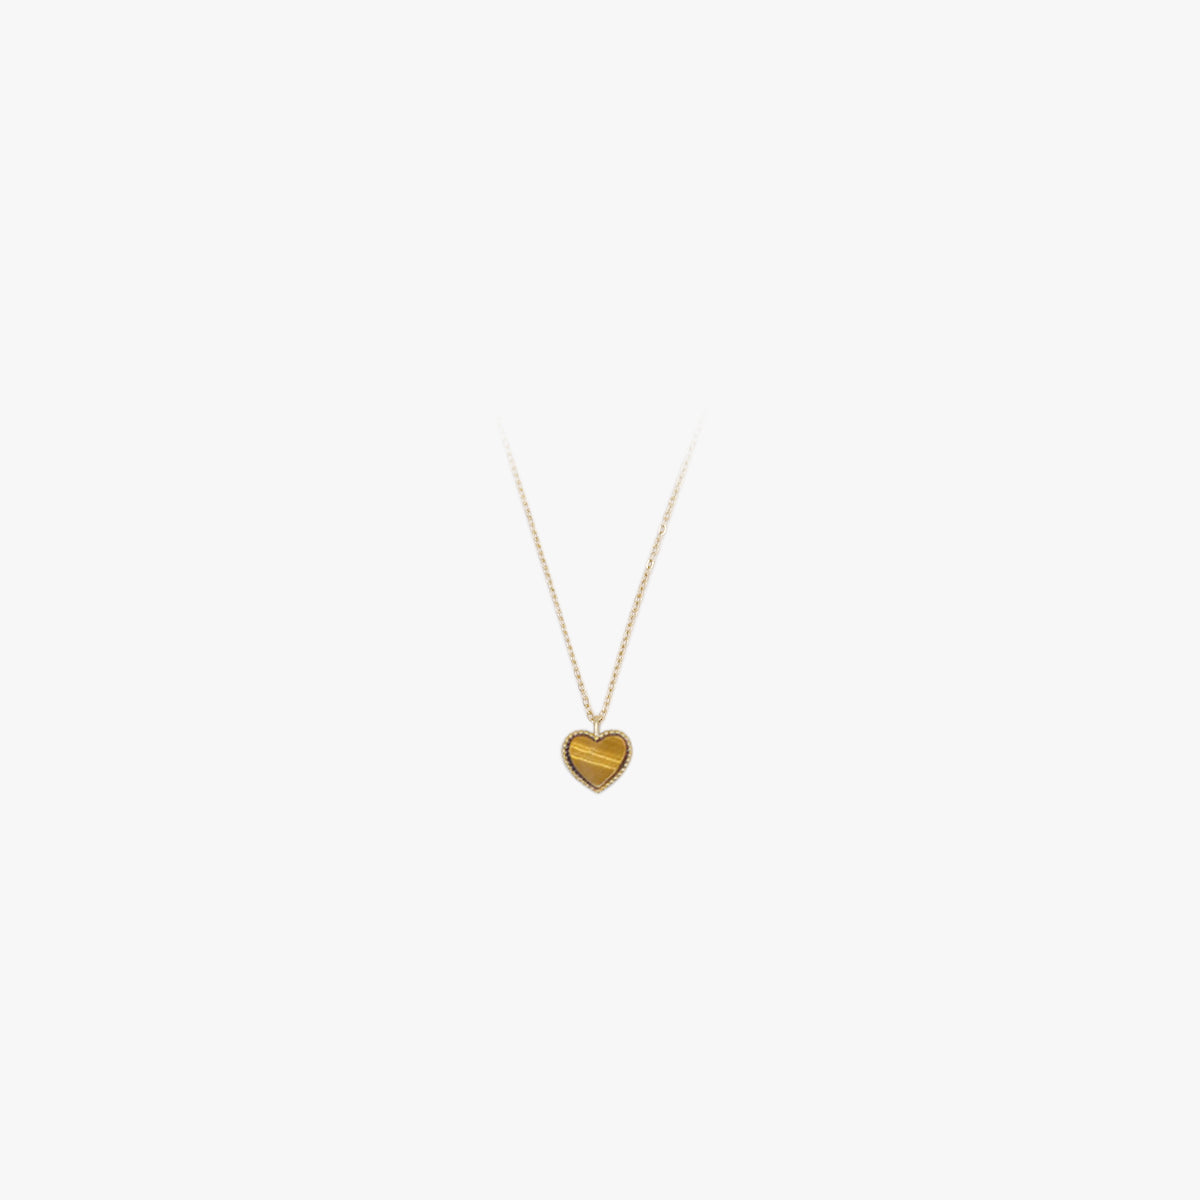 The Mini Heart Diamond Necklace in Solid Gold